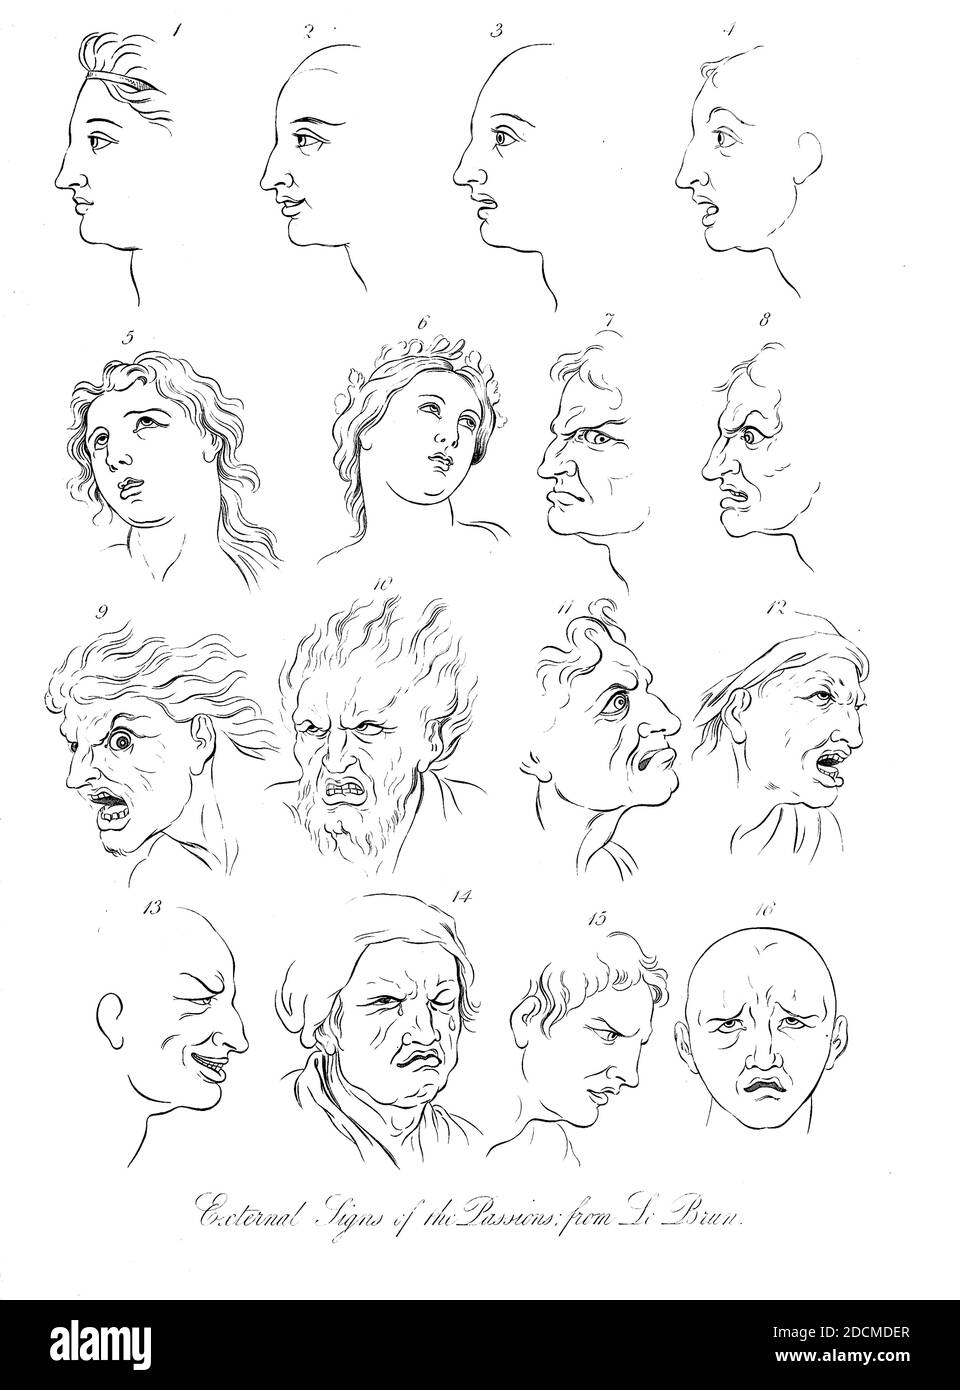 External Signs of the Passions; from Le Brun 16 facial expressions expressing various emotions. Copperplate engraving From the Encyclopaedia Londinensis or, Universal dictionary of arts, sciences, and literature; Volume XVIII;  Edited by Wilkes, John. Published in London in 1821 Stock Photo